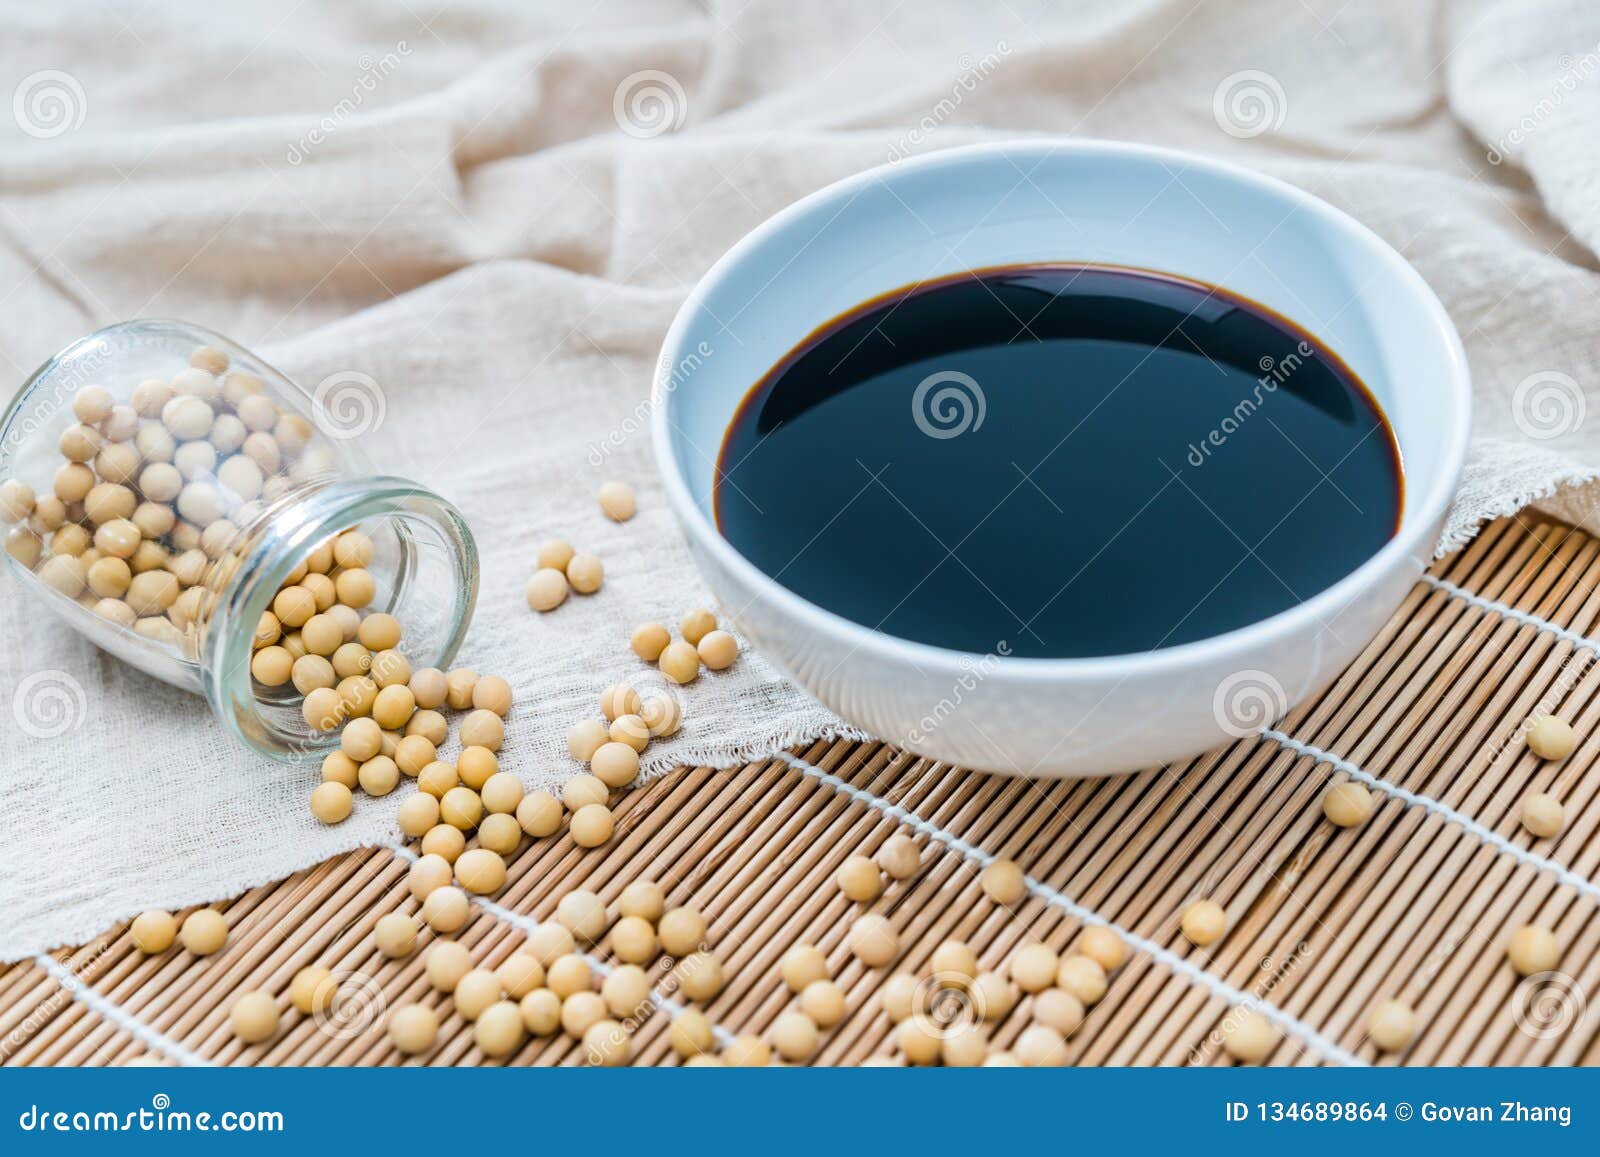 a bowl of soy sauce and sprinkled soybeans